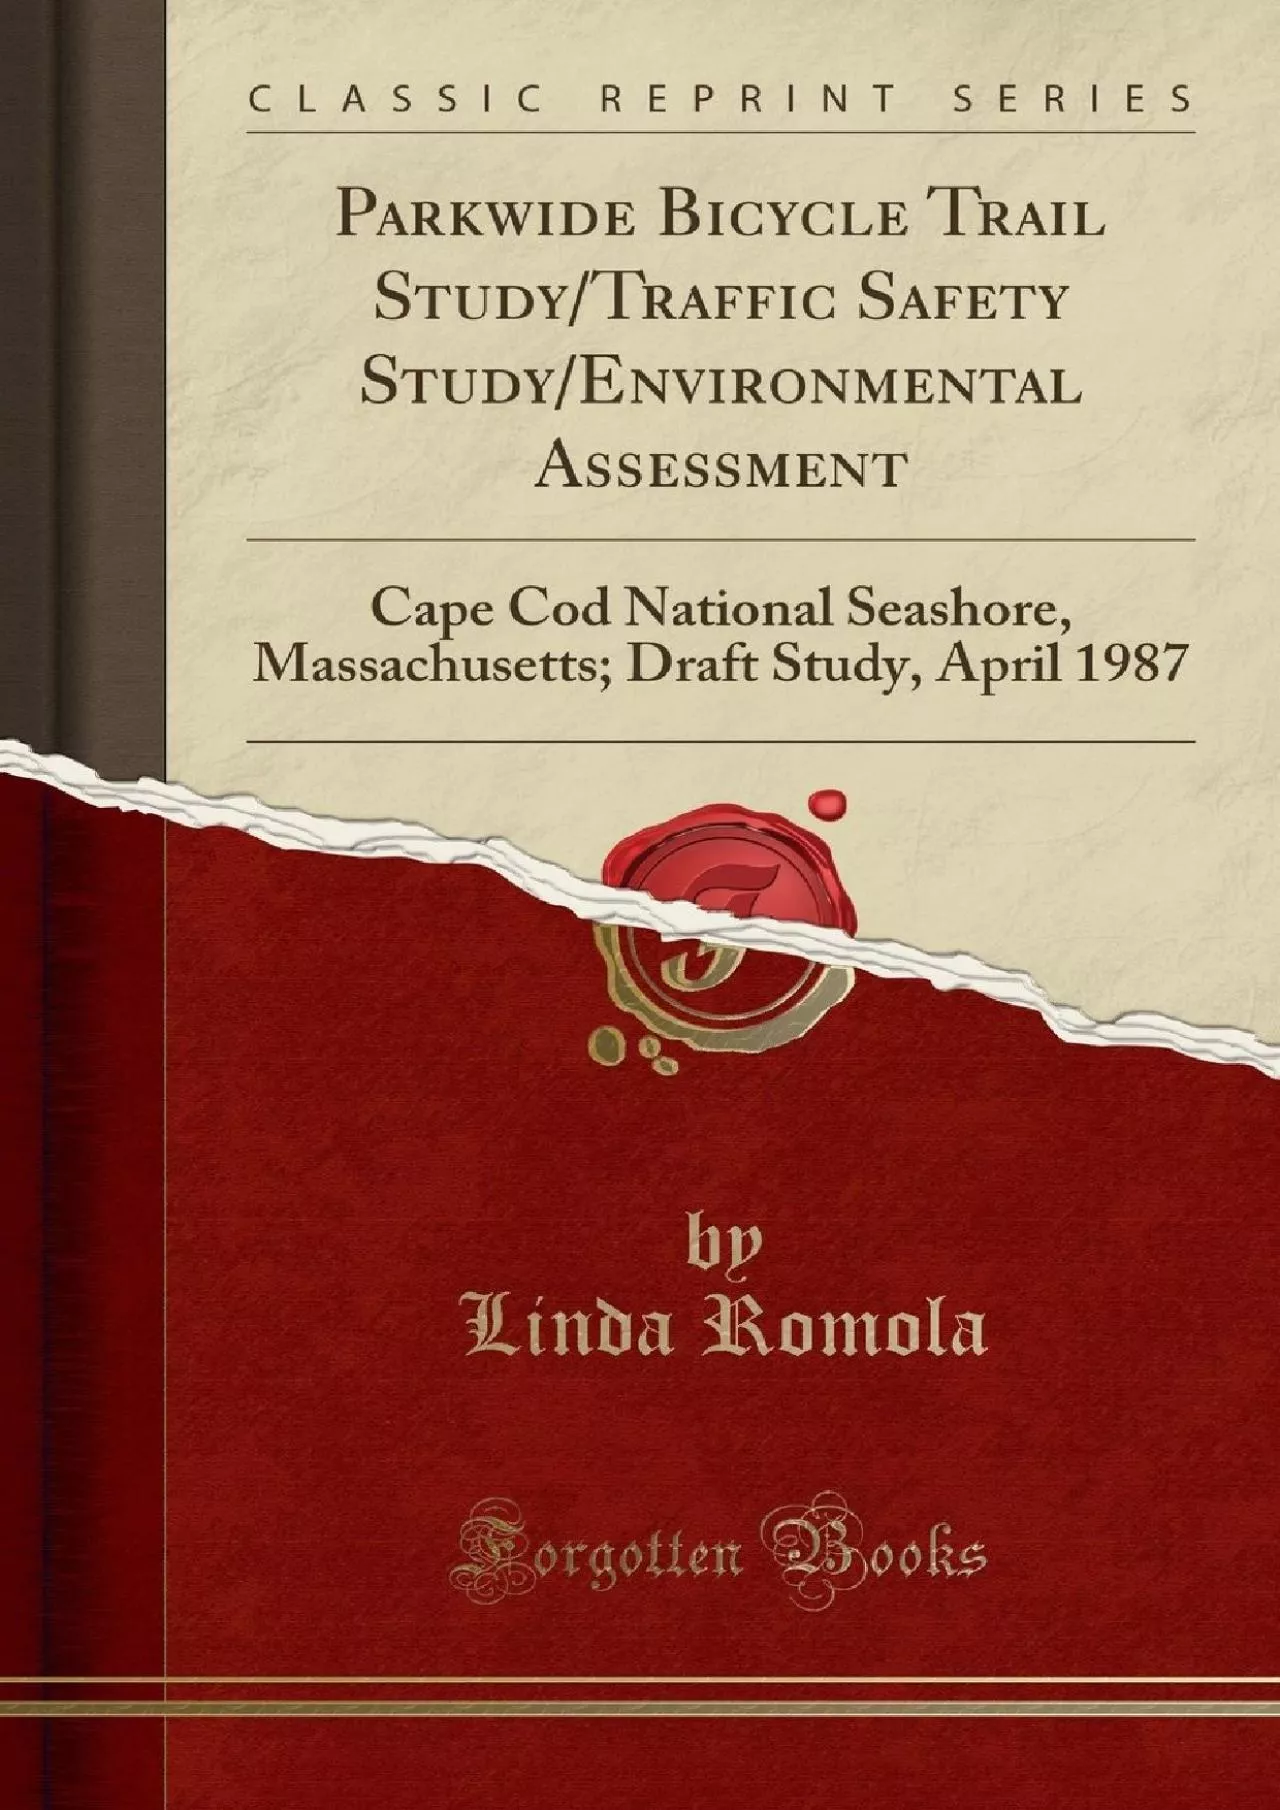 (BOOK)-Parkwide Bicycle Trail Study/Traffic Safety Study/Environmental Assessment: Cape